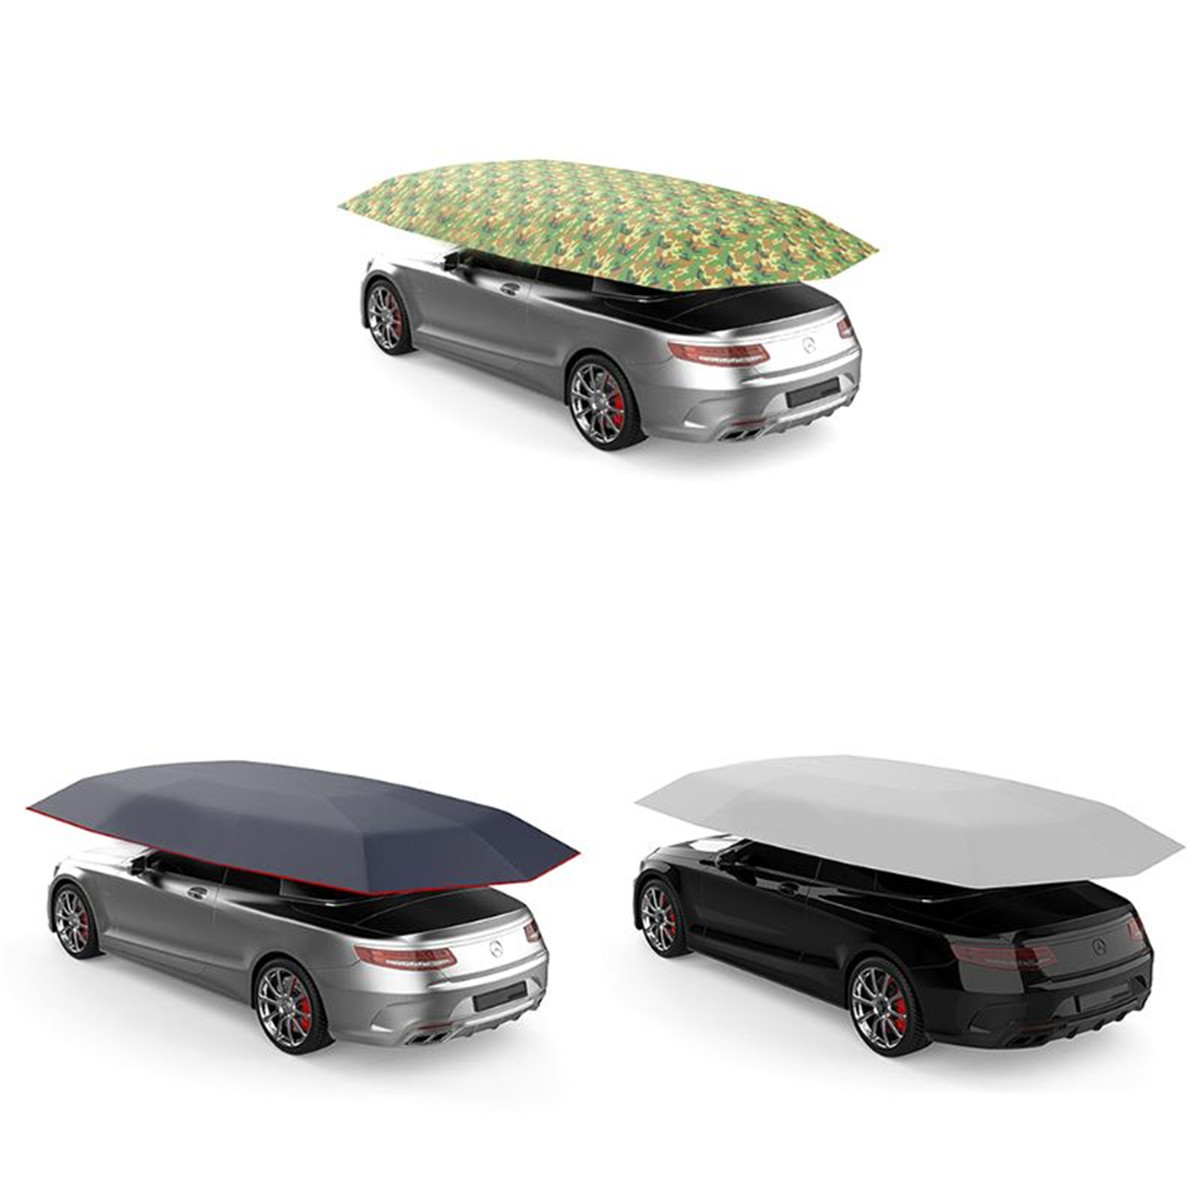 

4.5x2.3M Outdoor Car Vehicle Tent Car Umbrella Sun Shade Cover Oxford Cloth Polyester Covers